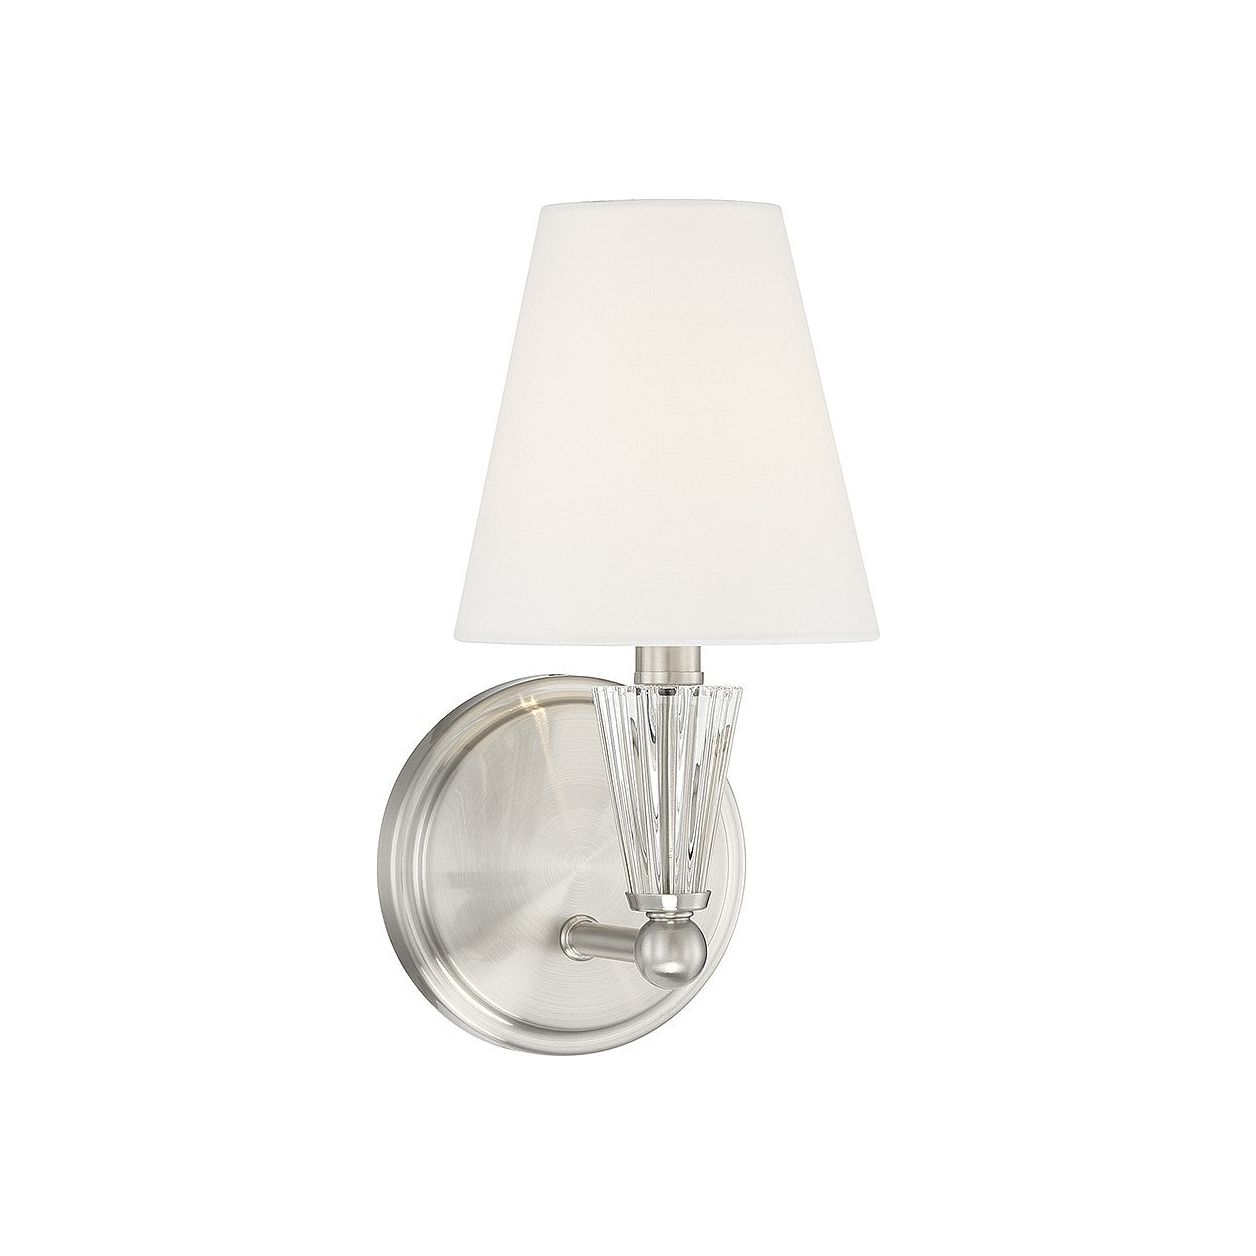 Meridian - M90102BN - One Light Wall Sconce - Brushed Nickel